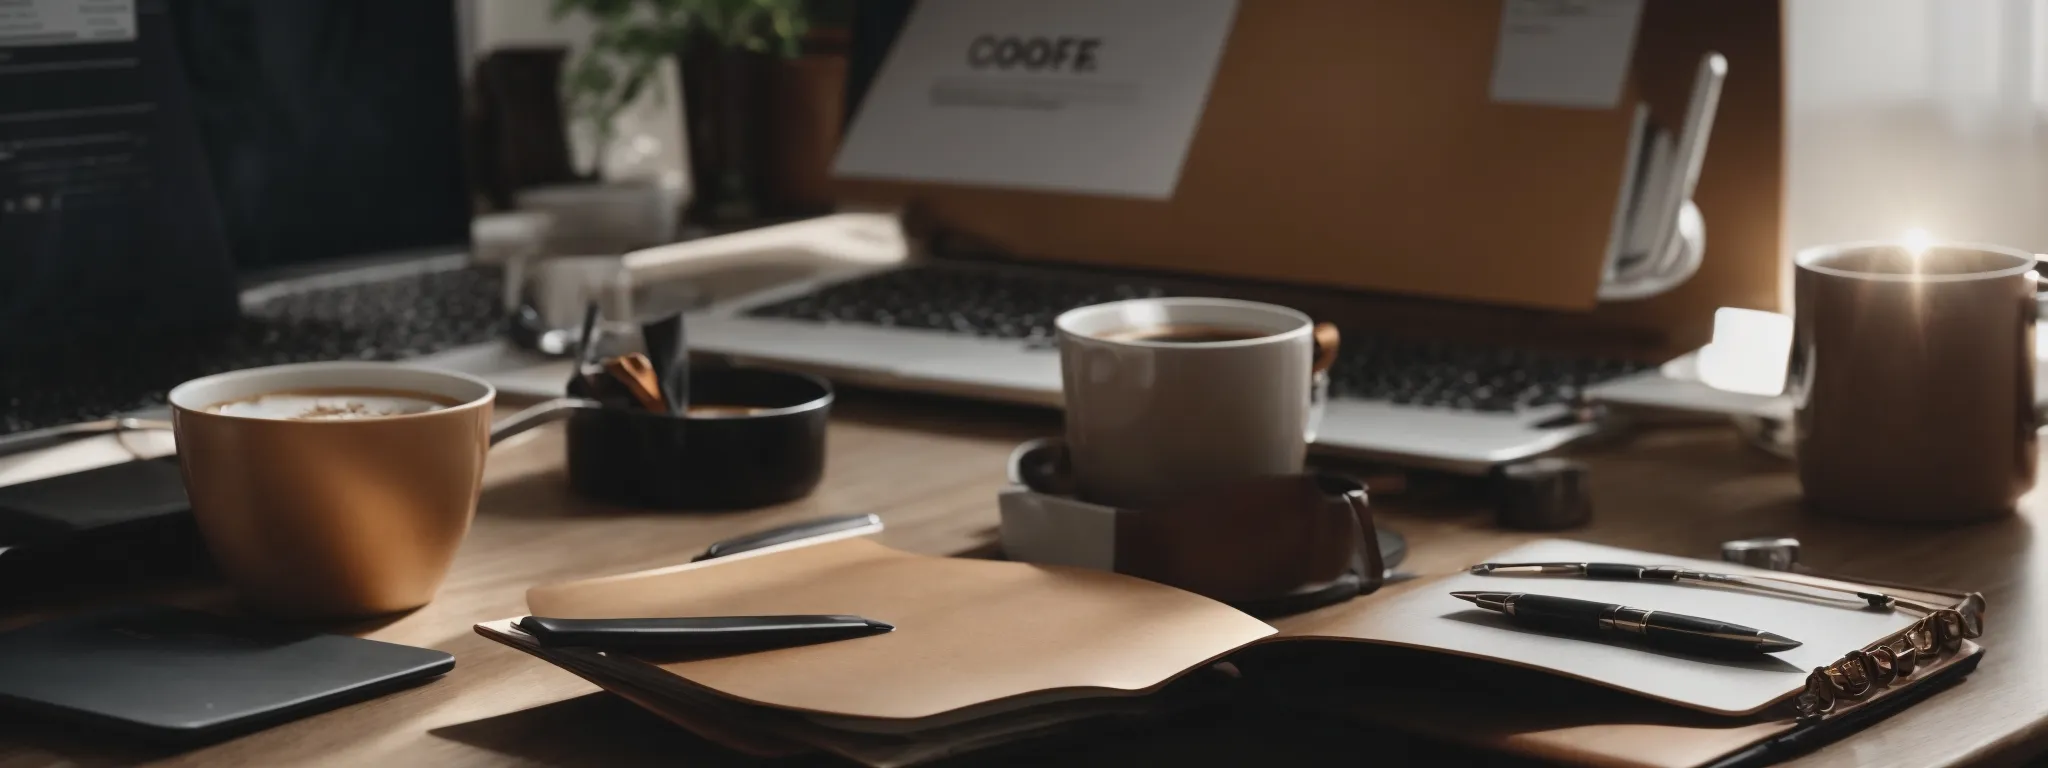 a laptop, coffee cup, and a notepad on a desk, symbolizing a content creator's workspace focused on seo strategy.